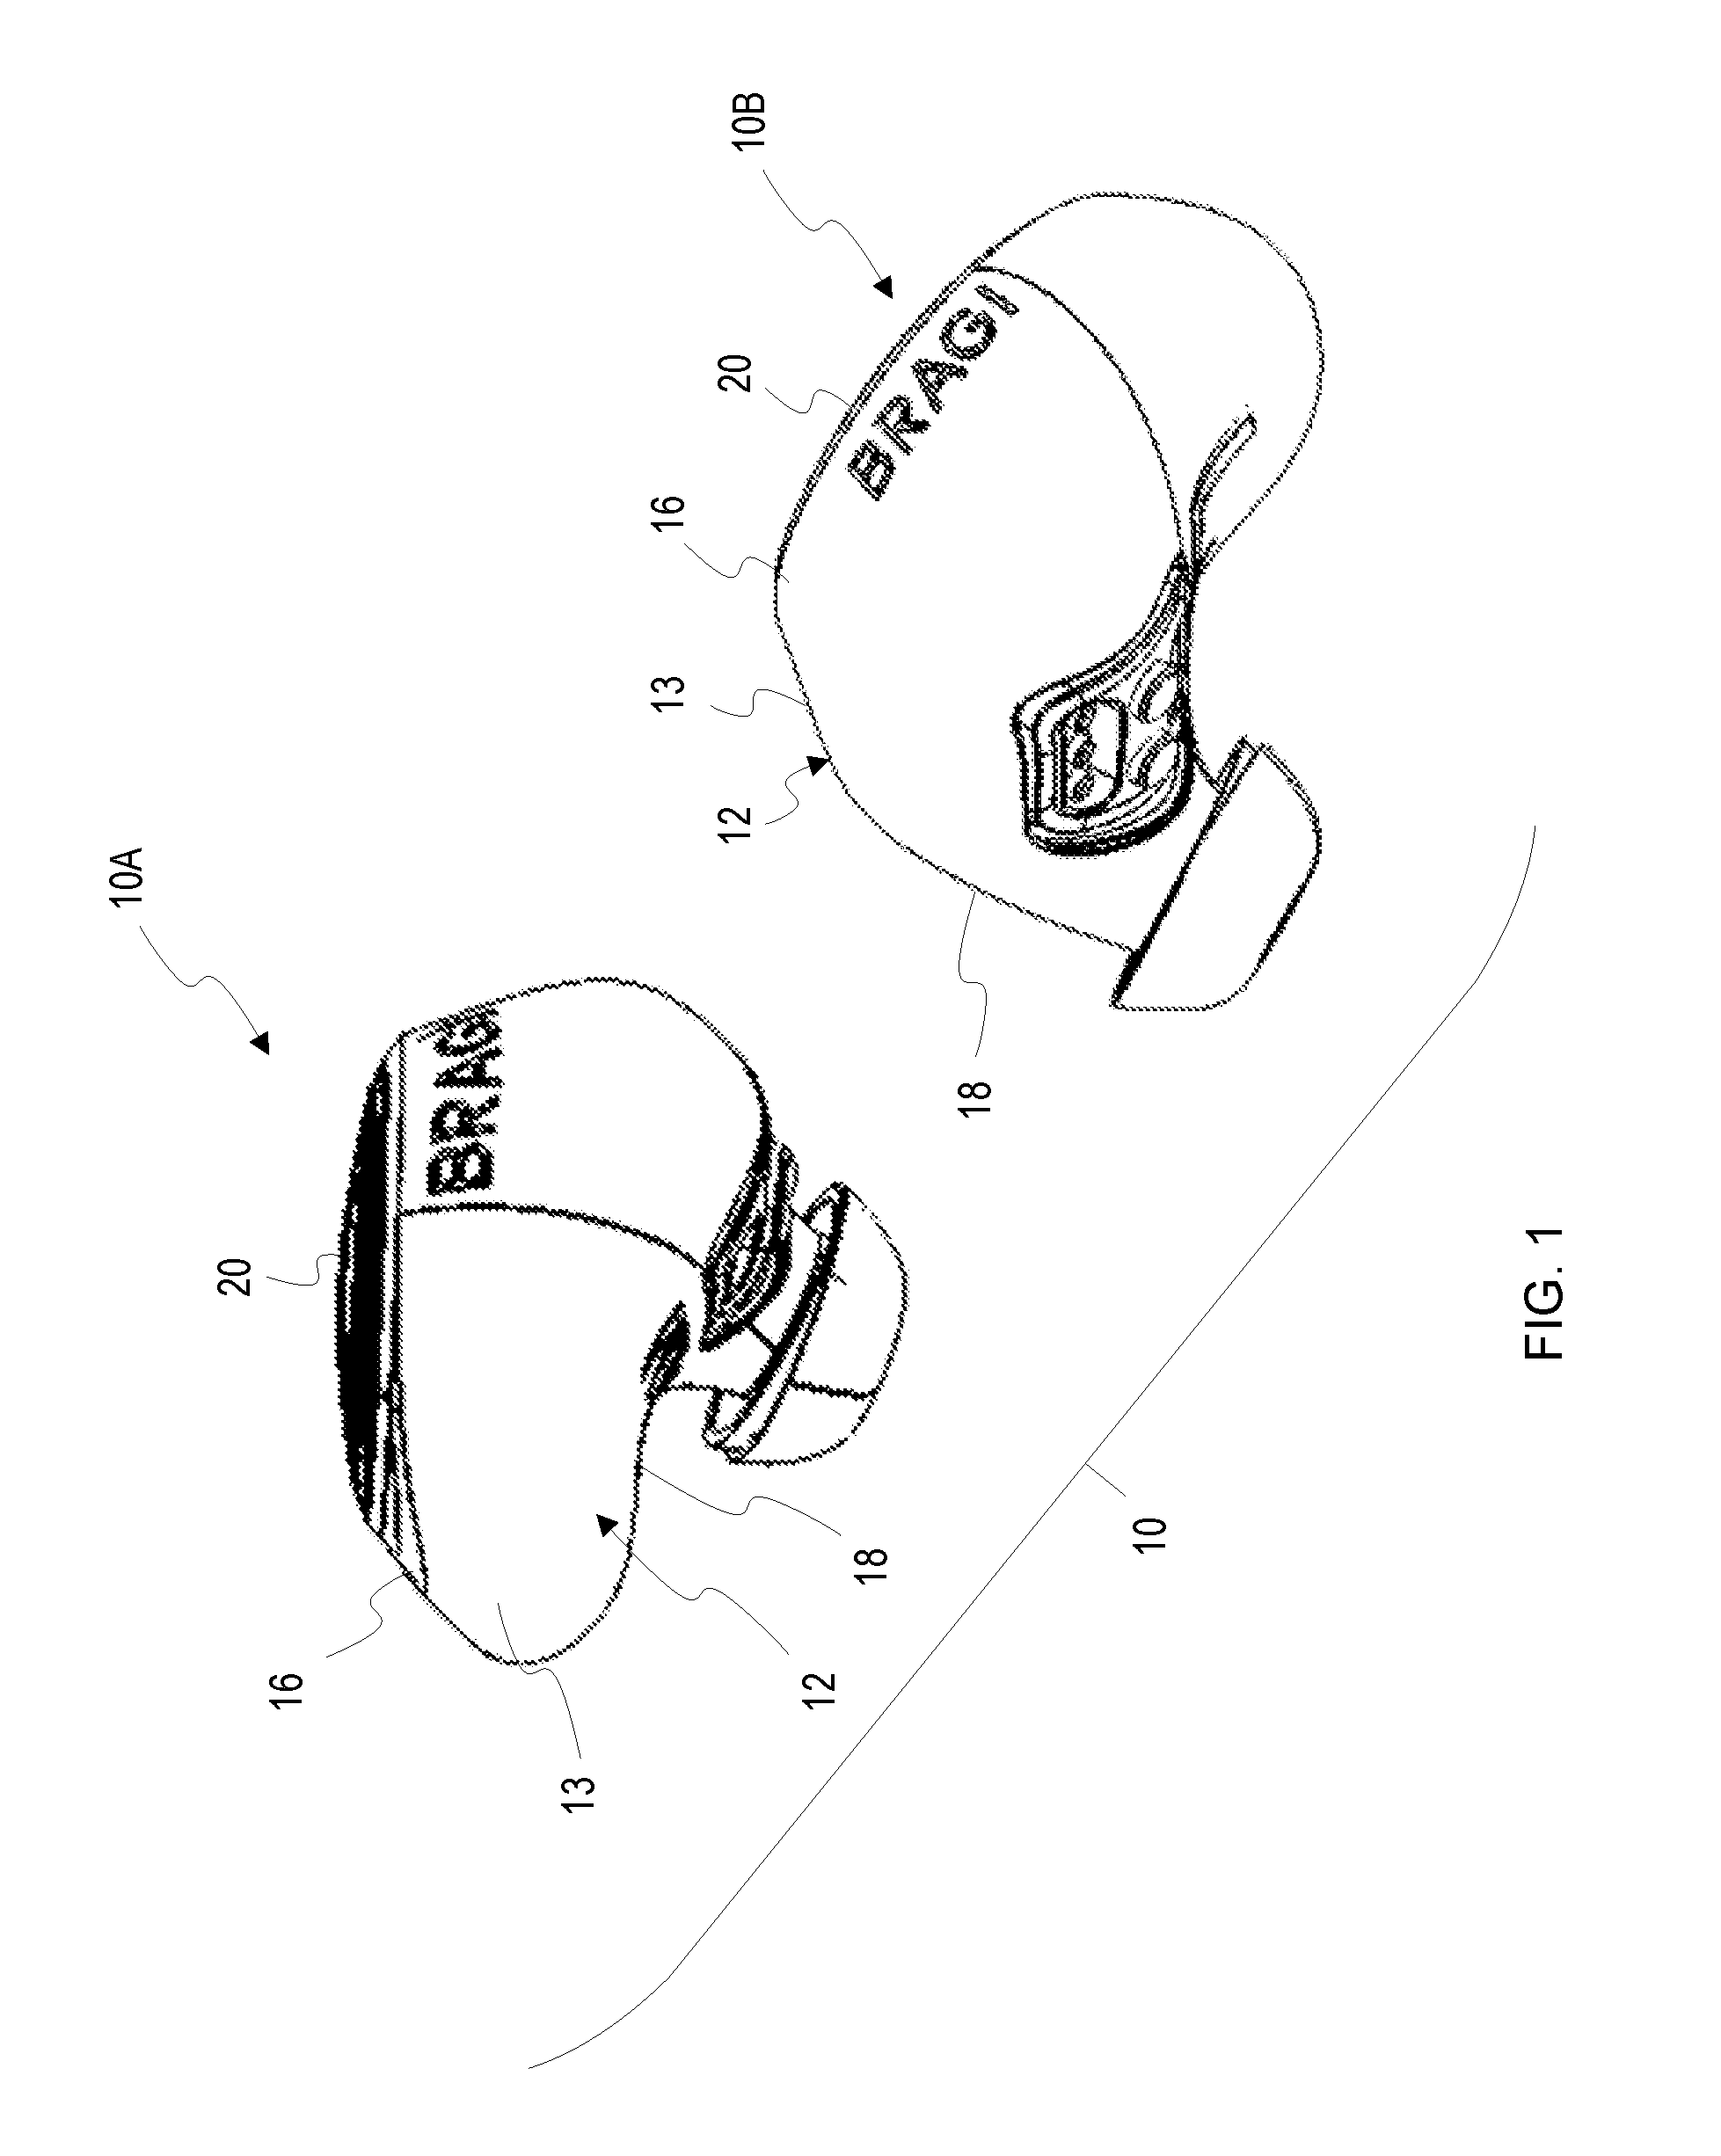 Antenna for Use in a Wearable Device